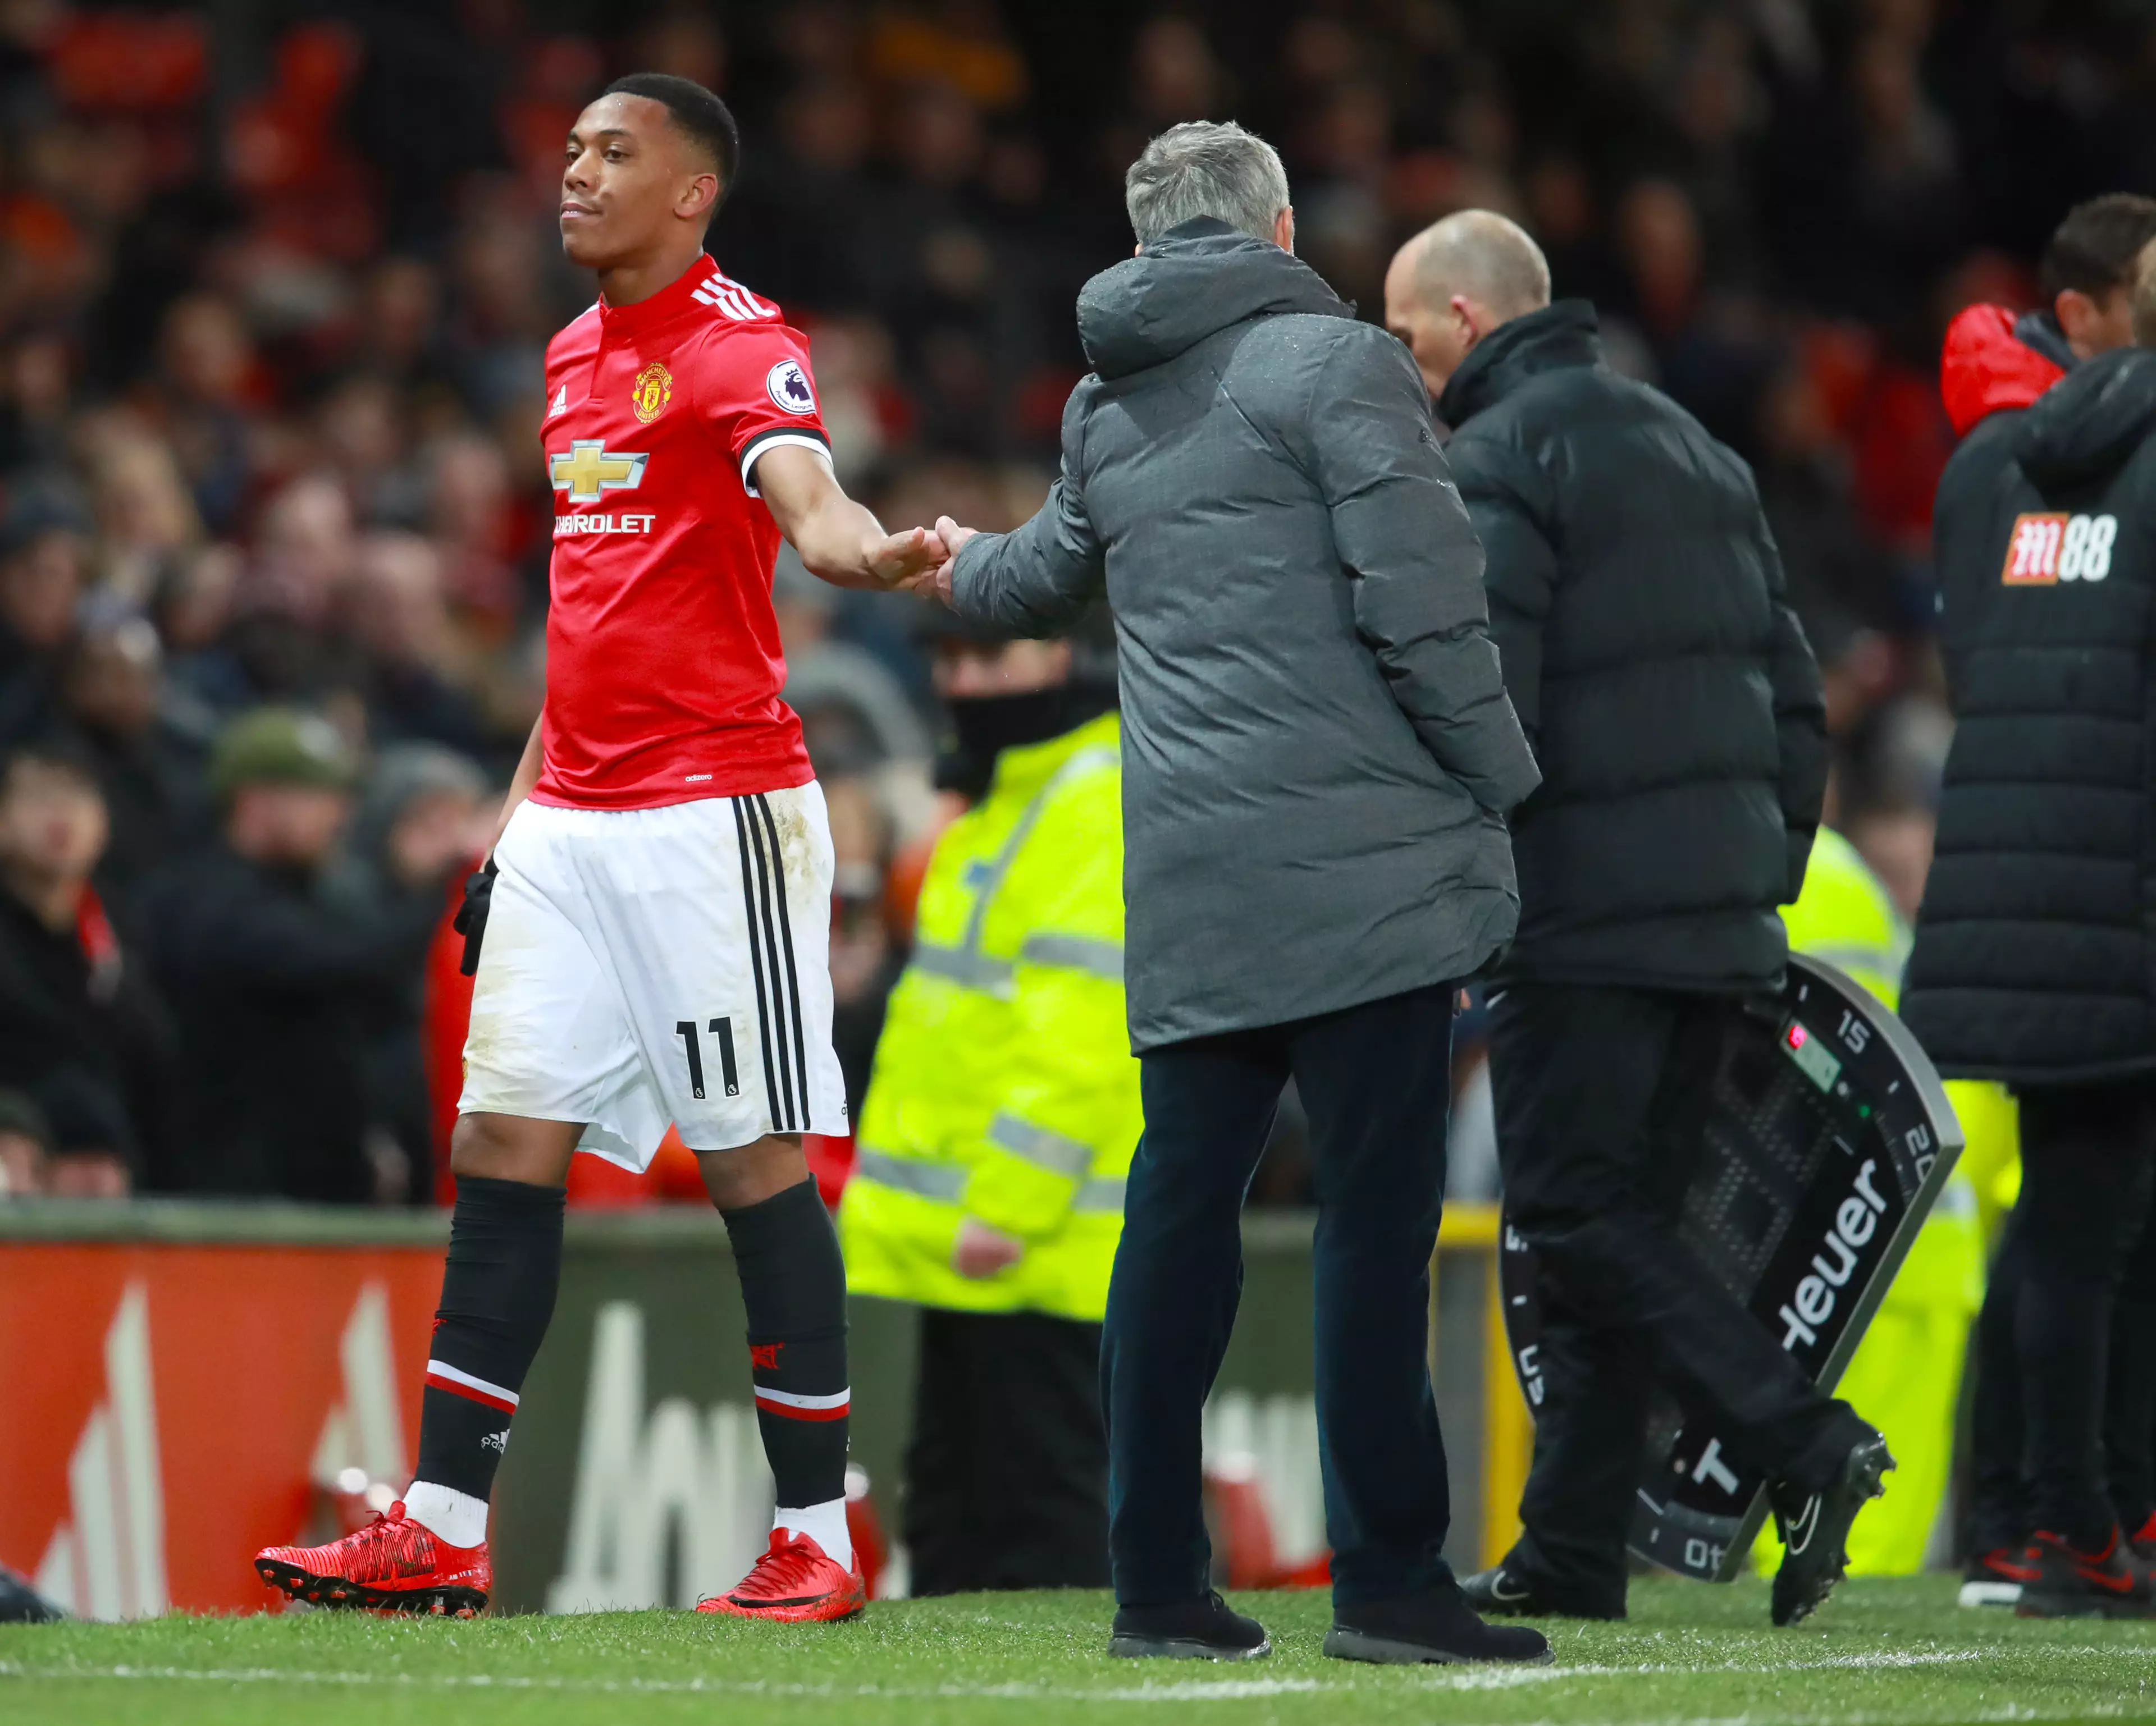 Martial and Mourinho didn't have a good relationship. Image: PA Images